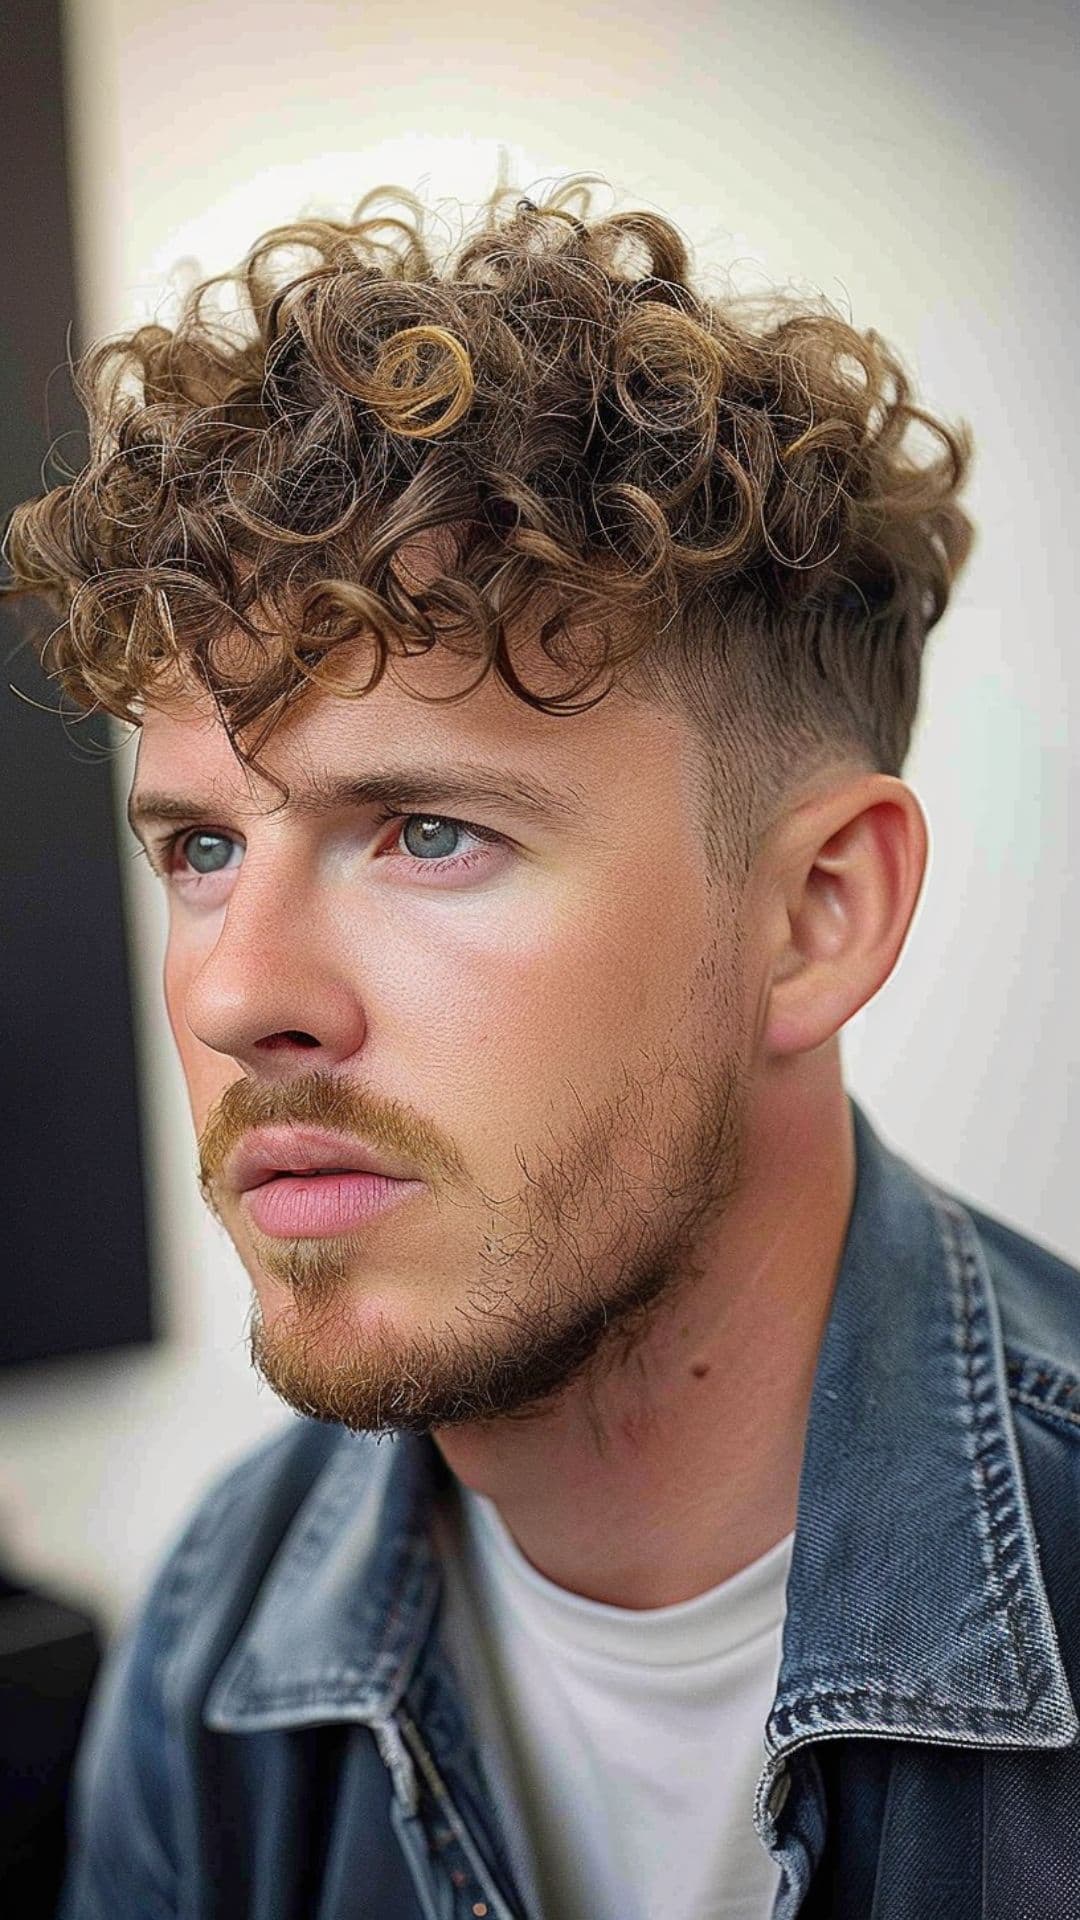 A man modelling a curly top with short sides hairstyle.